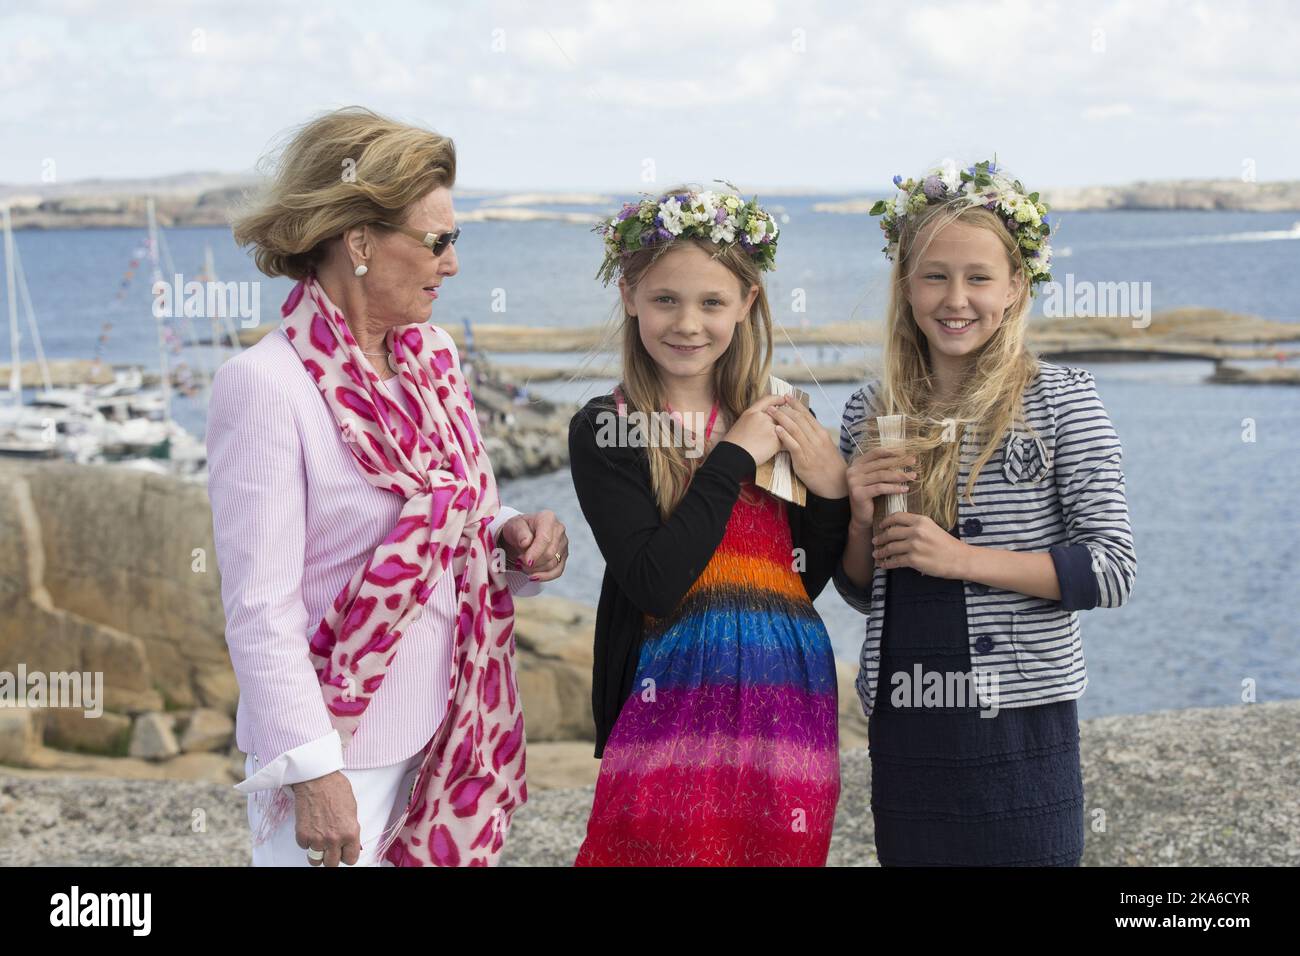 Faerder, Norway 20150627. HM Queen Sonja visits Faerder National Park at Verdens Ende on Tjoemoe. She is welcomed by Anna Almquist and Neele Putz, both are 5th grade students at Lindhoy school. Foto: Terje Bendiksby / NTB scanpix  Stock Photo